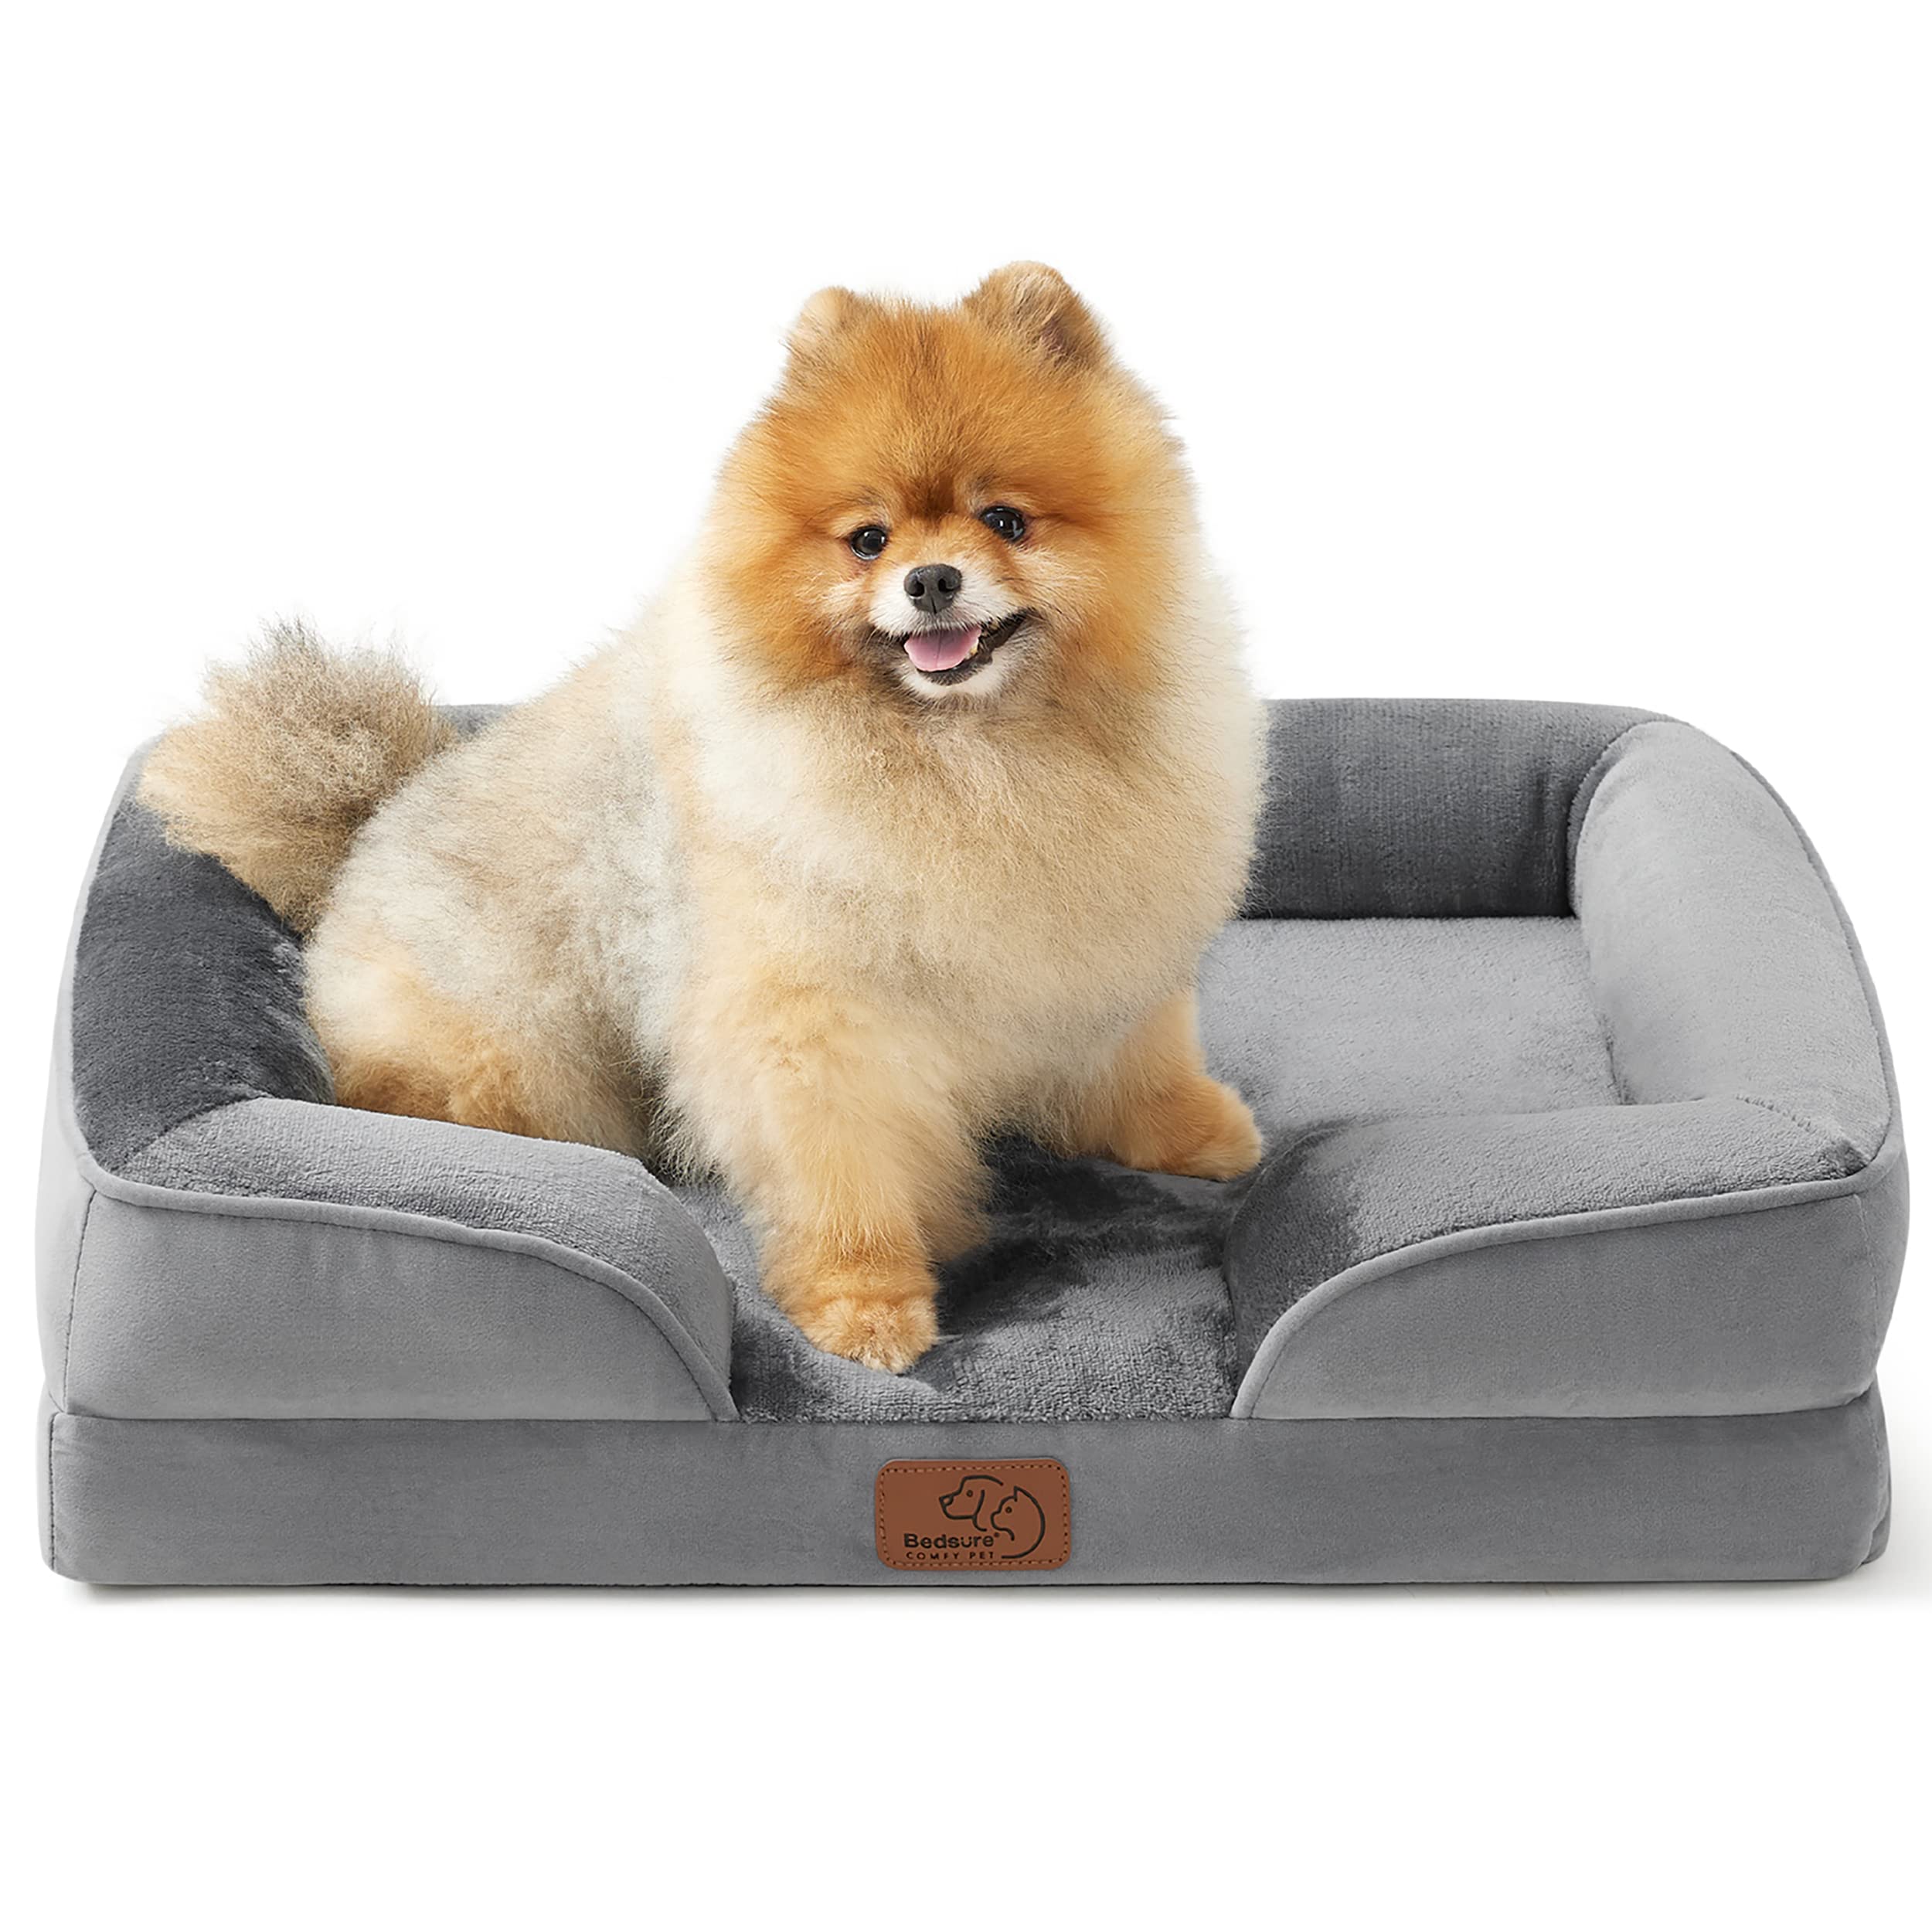 Bedsure Orthopedic Dog Bed - Bolster Dog Sofa Beds for Small Dogs, Supportive Foam Pet Bed with Removable Washable Cover, Waterp